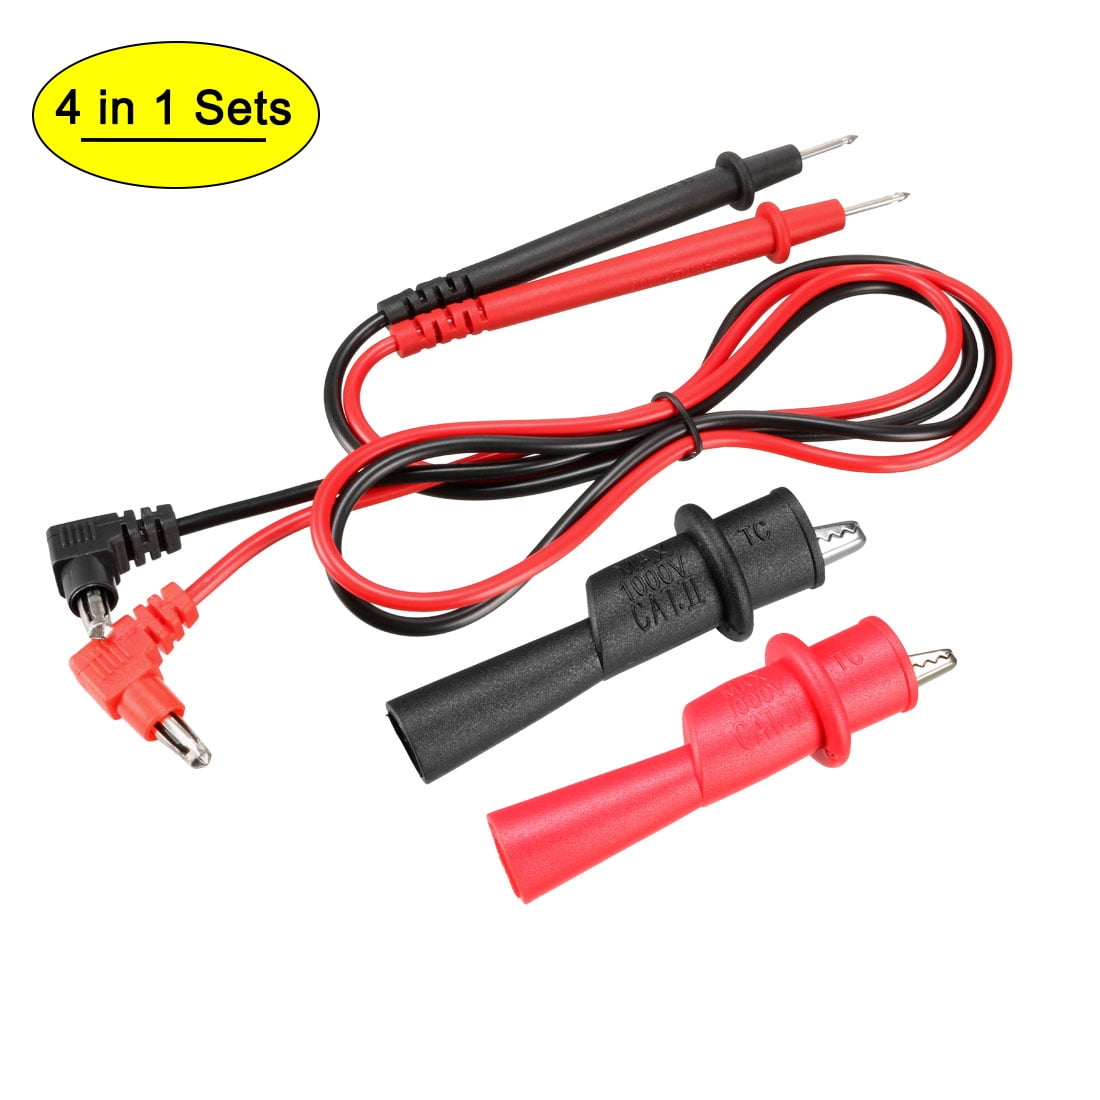 4PCS Safety Banana Plugs to Dual Hook Test Leads Clip Probe Cable for Multimeter 